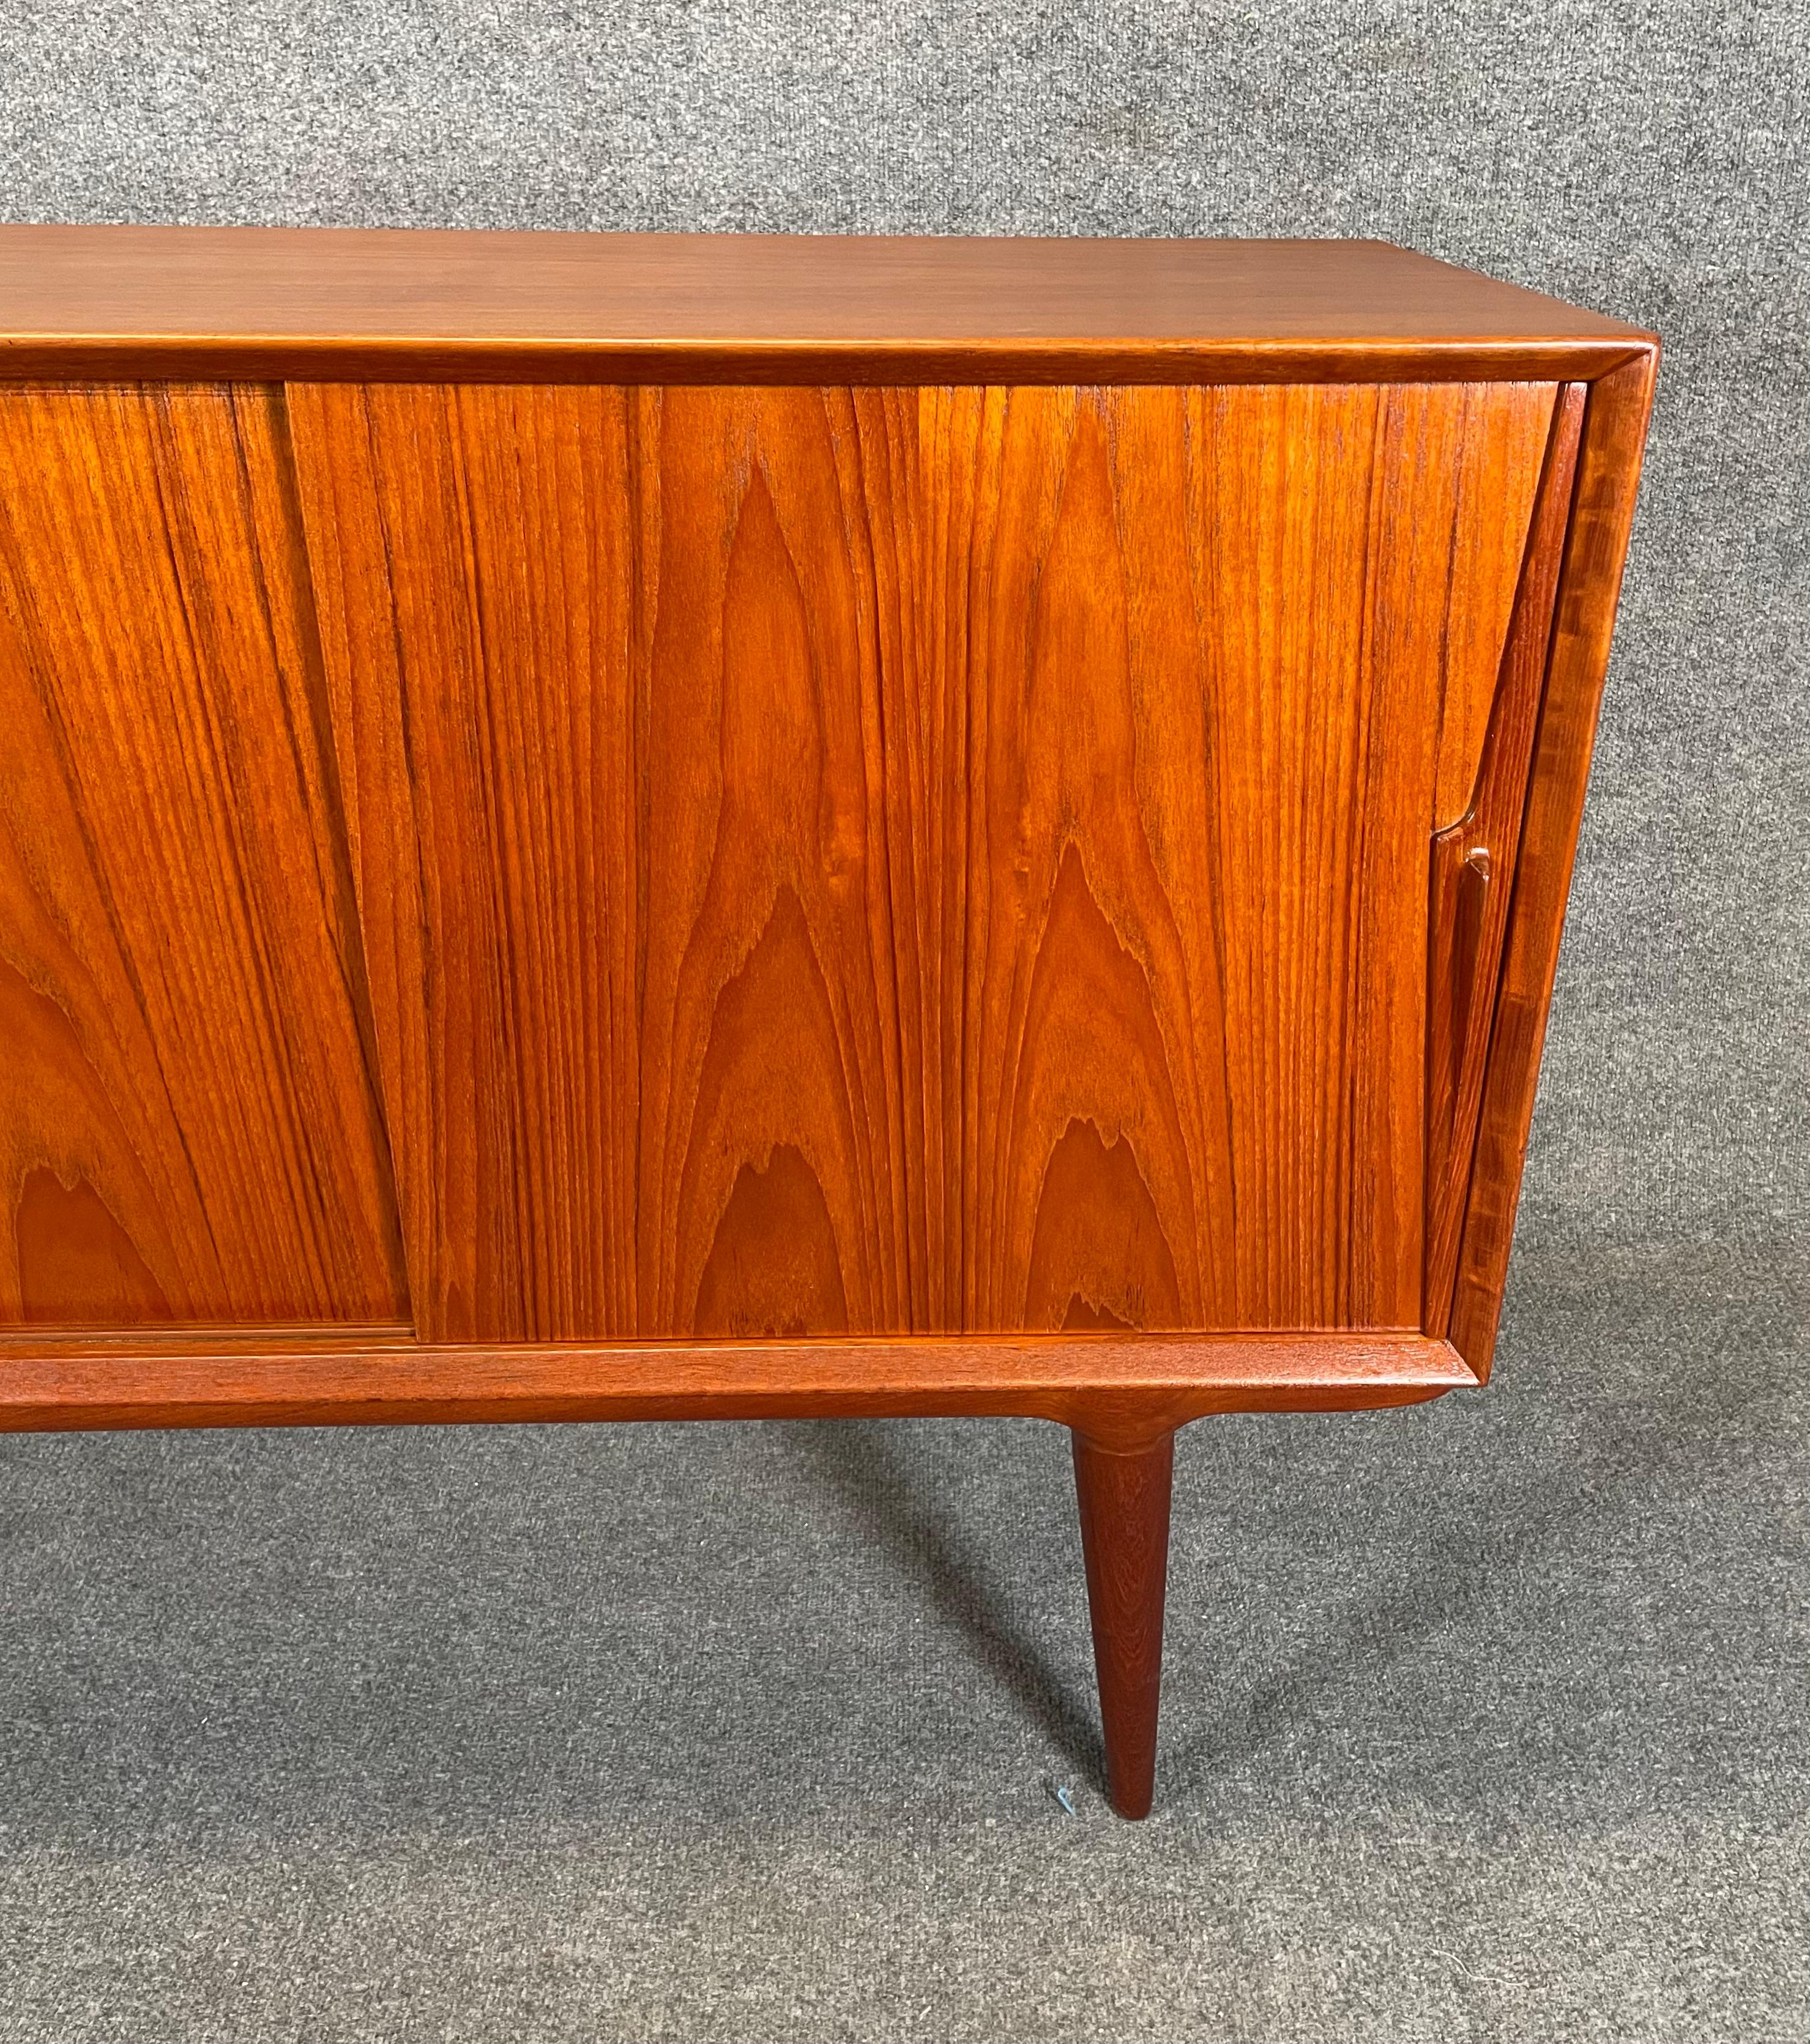 Here is a beautiful and rare Scandinavian modern sideboard in teak designed by Gunni Omann and manufactured by Omann Jun in Denmark in the 1960's.
This lovely case piece, recently imported from Europe to California before its refinishing, features a